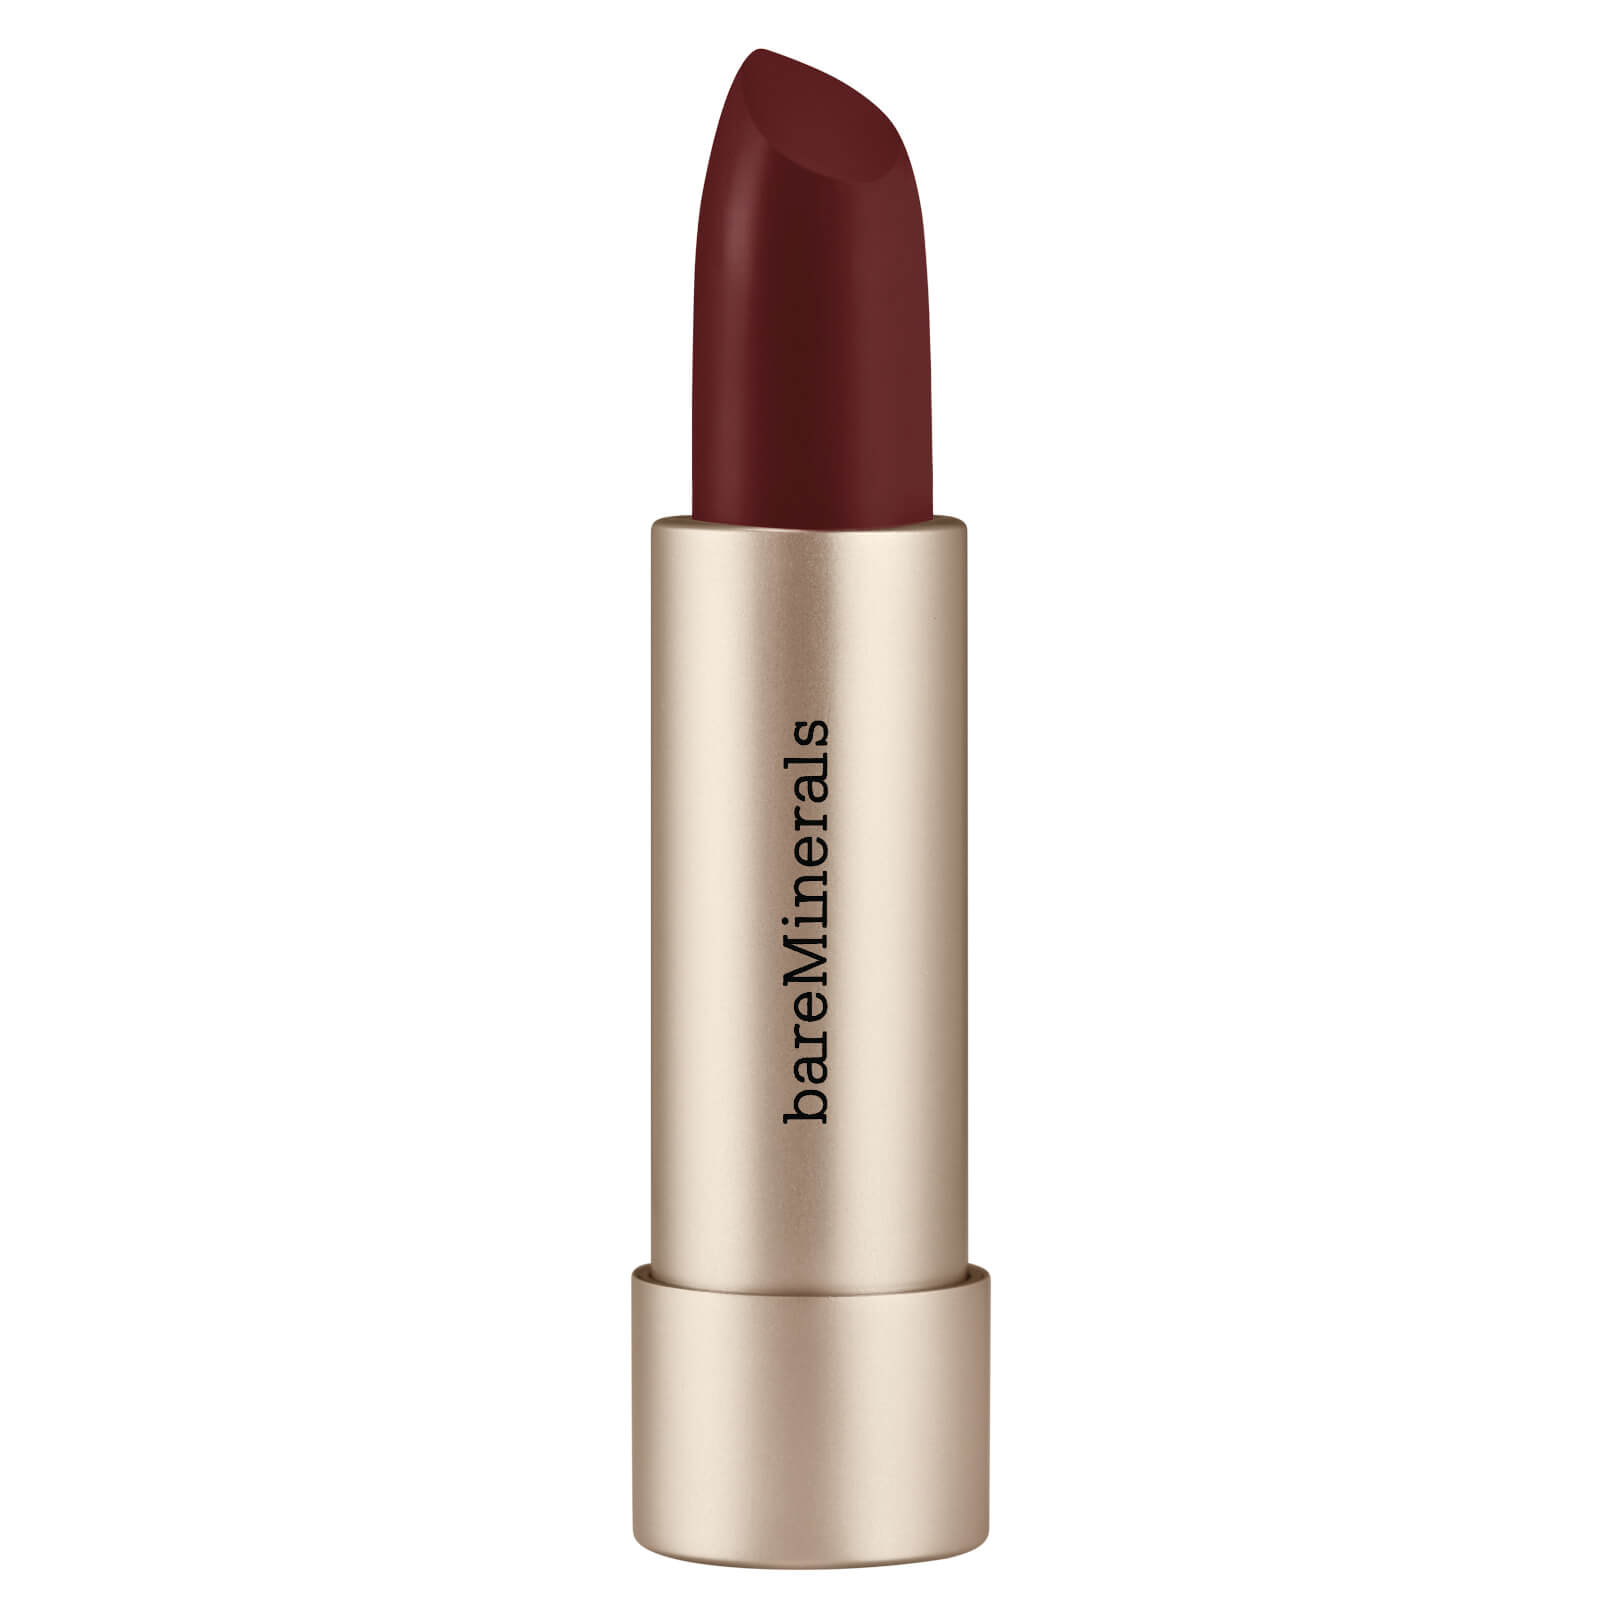 Image of bareMinerals Mineralist Hydra Smoothing Lipstick 3.6g (Various Shades) - Perception